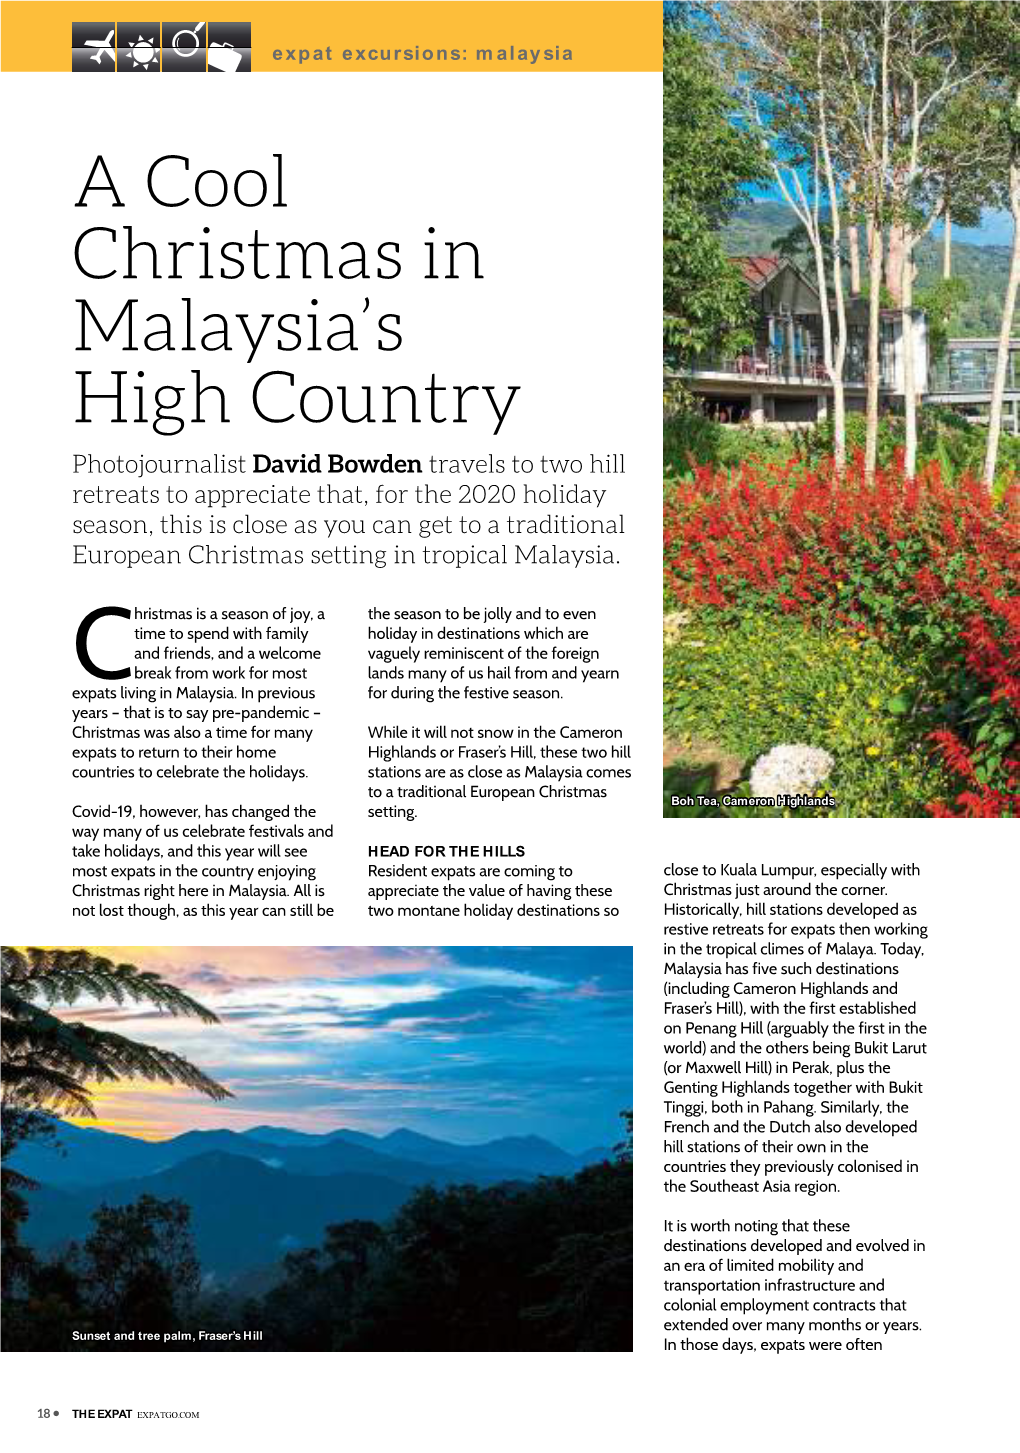 A Cool Christmas in Malaysia's High Country